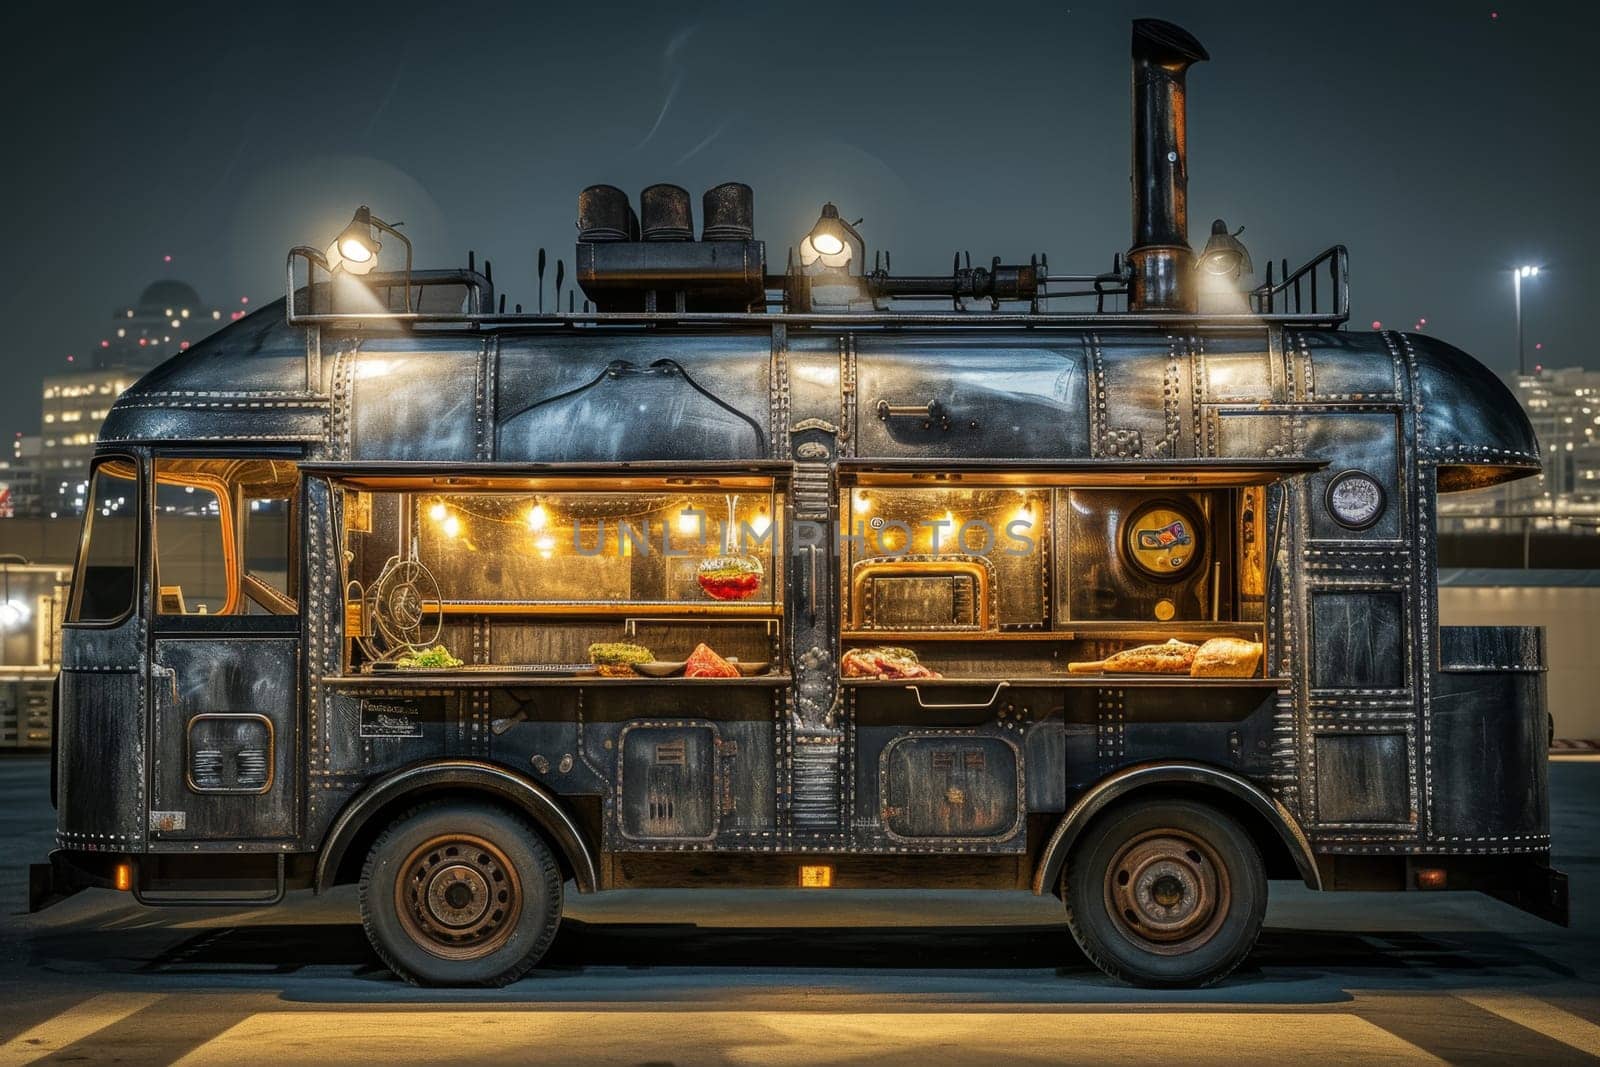 A van with street food. A food truck by Lobachad